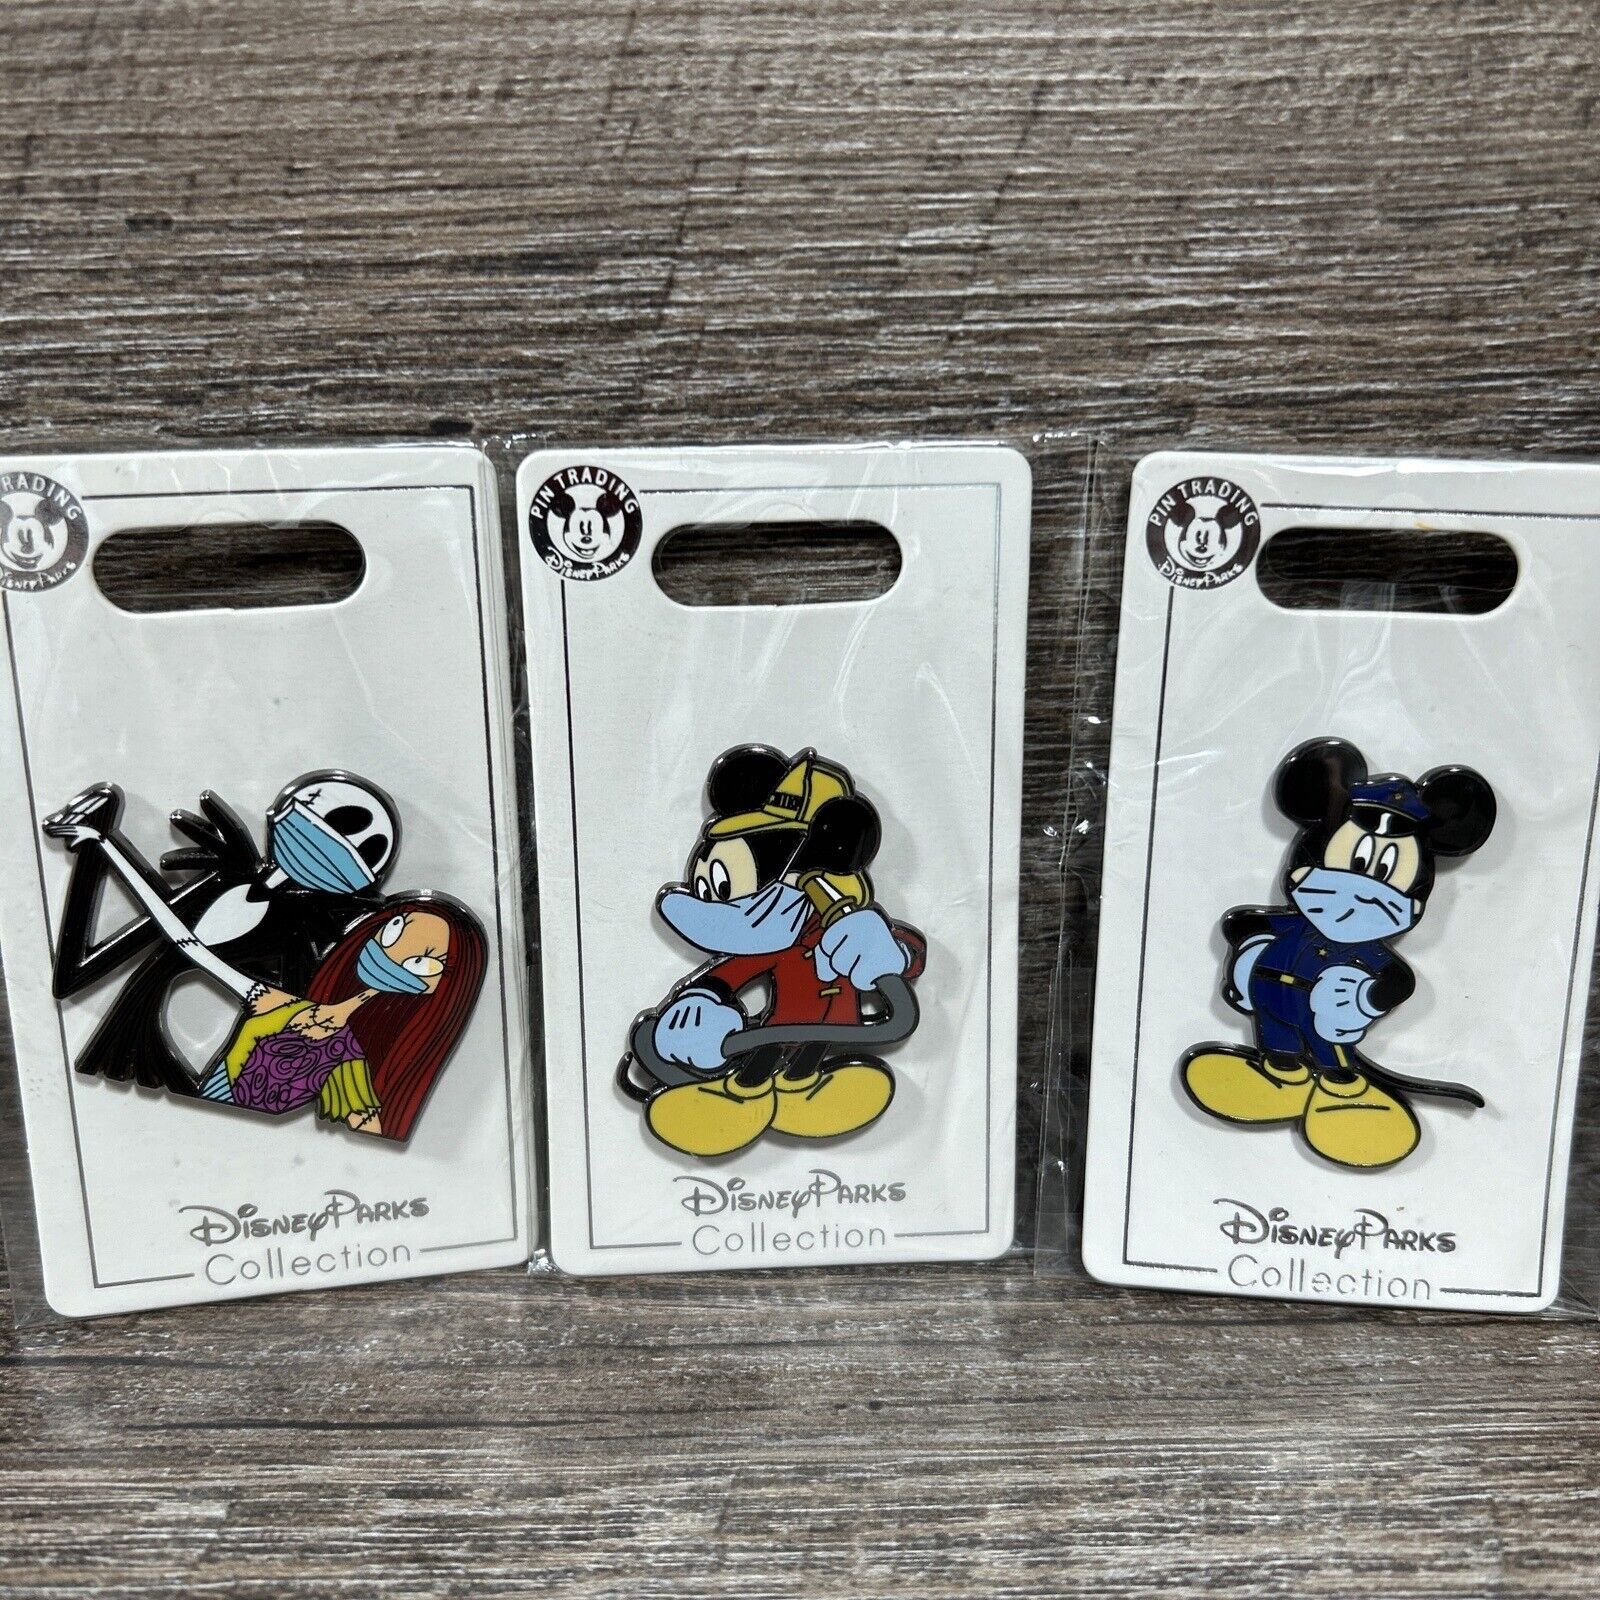 Set Of 3 Disney Cartoon Badges Made In China ( Jack& Sally Mickey Mouse)